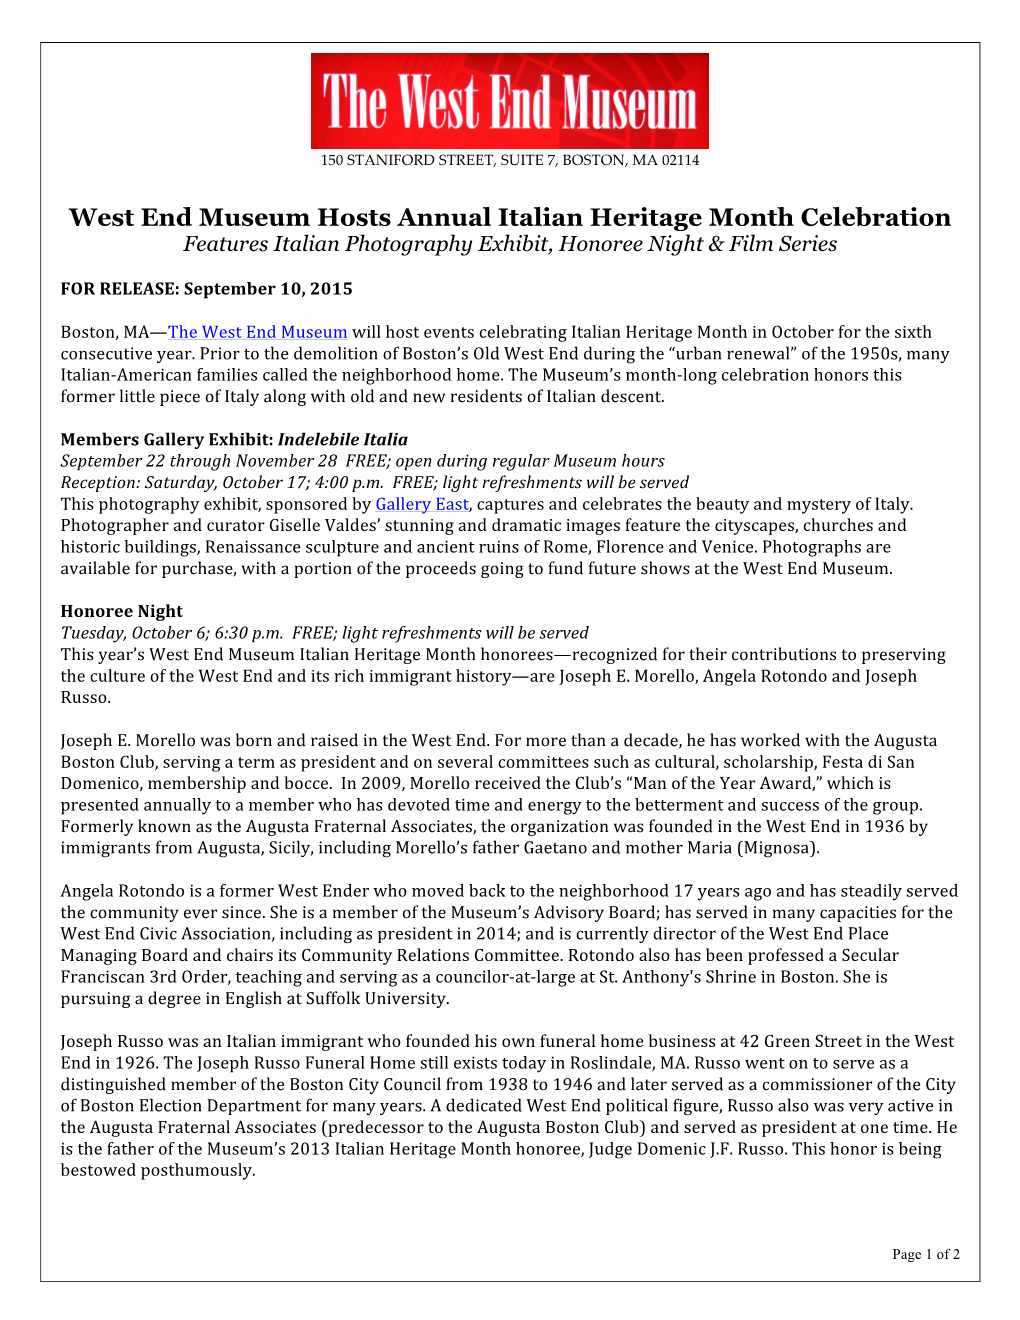 West End Museum Hosts Annual Italian Heritage Month Celebration Features Italian Photography Exhibit, Honoree Night & Film Series